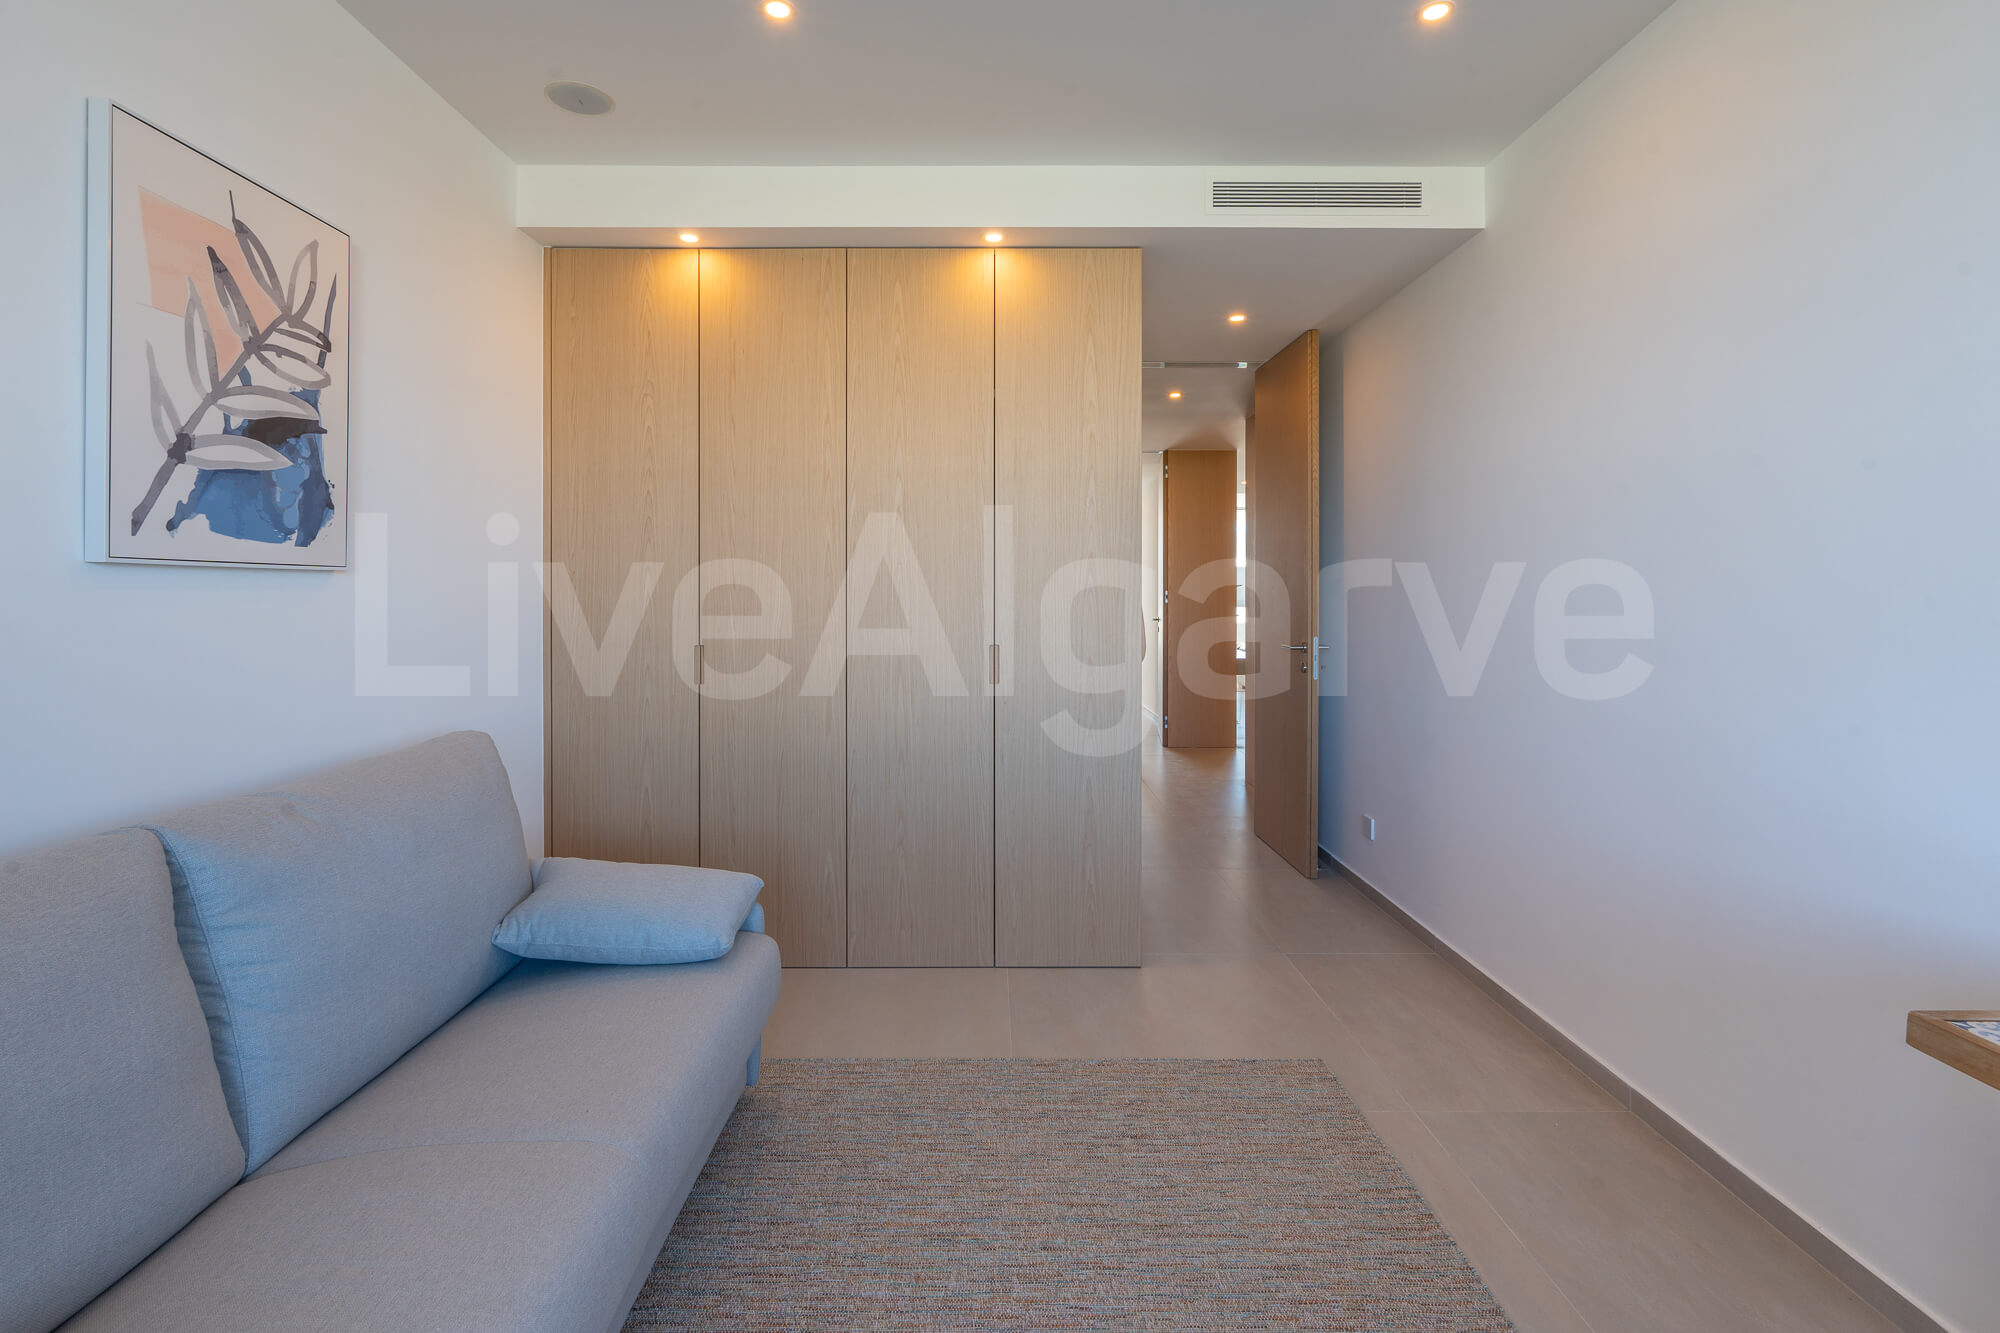 NEW BUILT | De Luxe Ultra-modern T3 City Flat at Dona Maria 2 Condo for Sale - Lagos